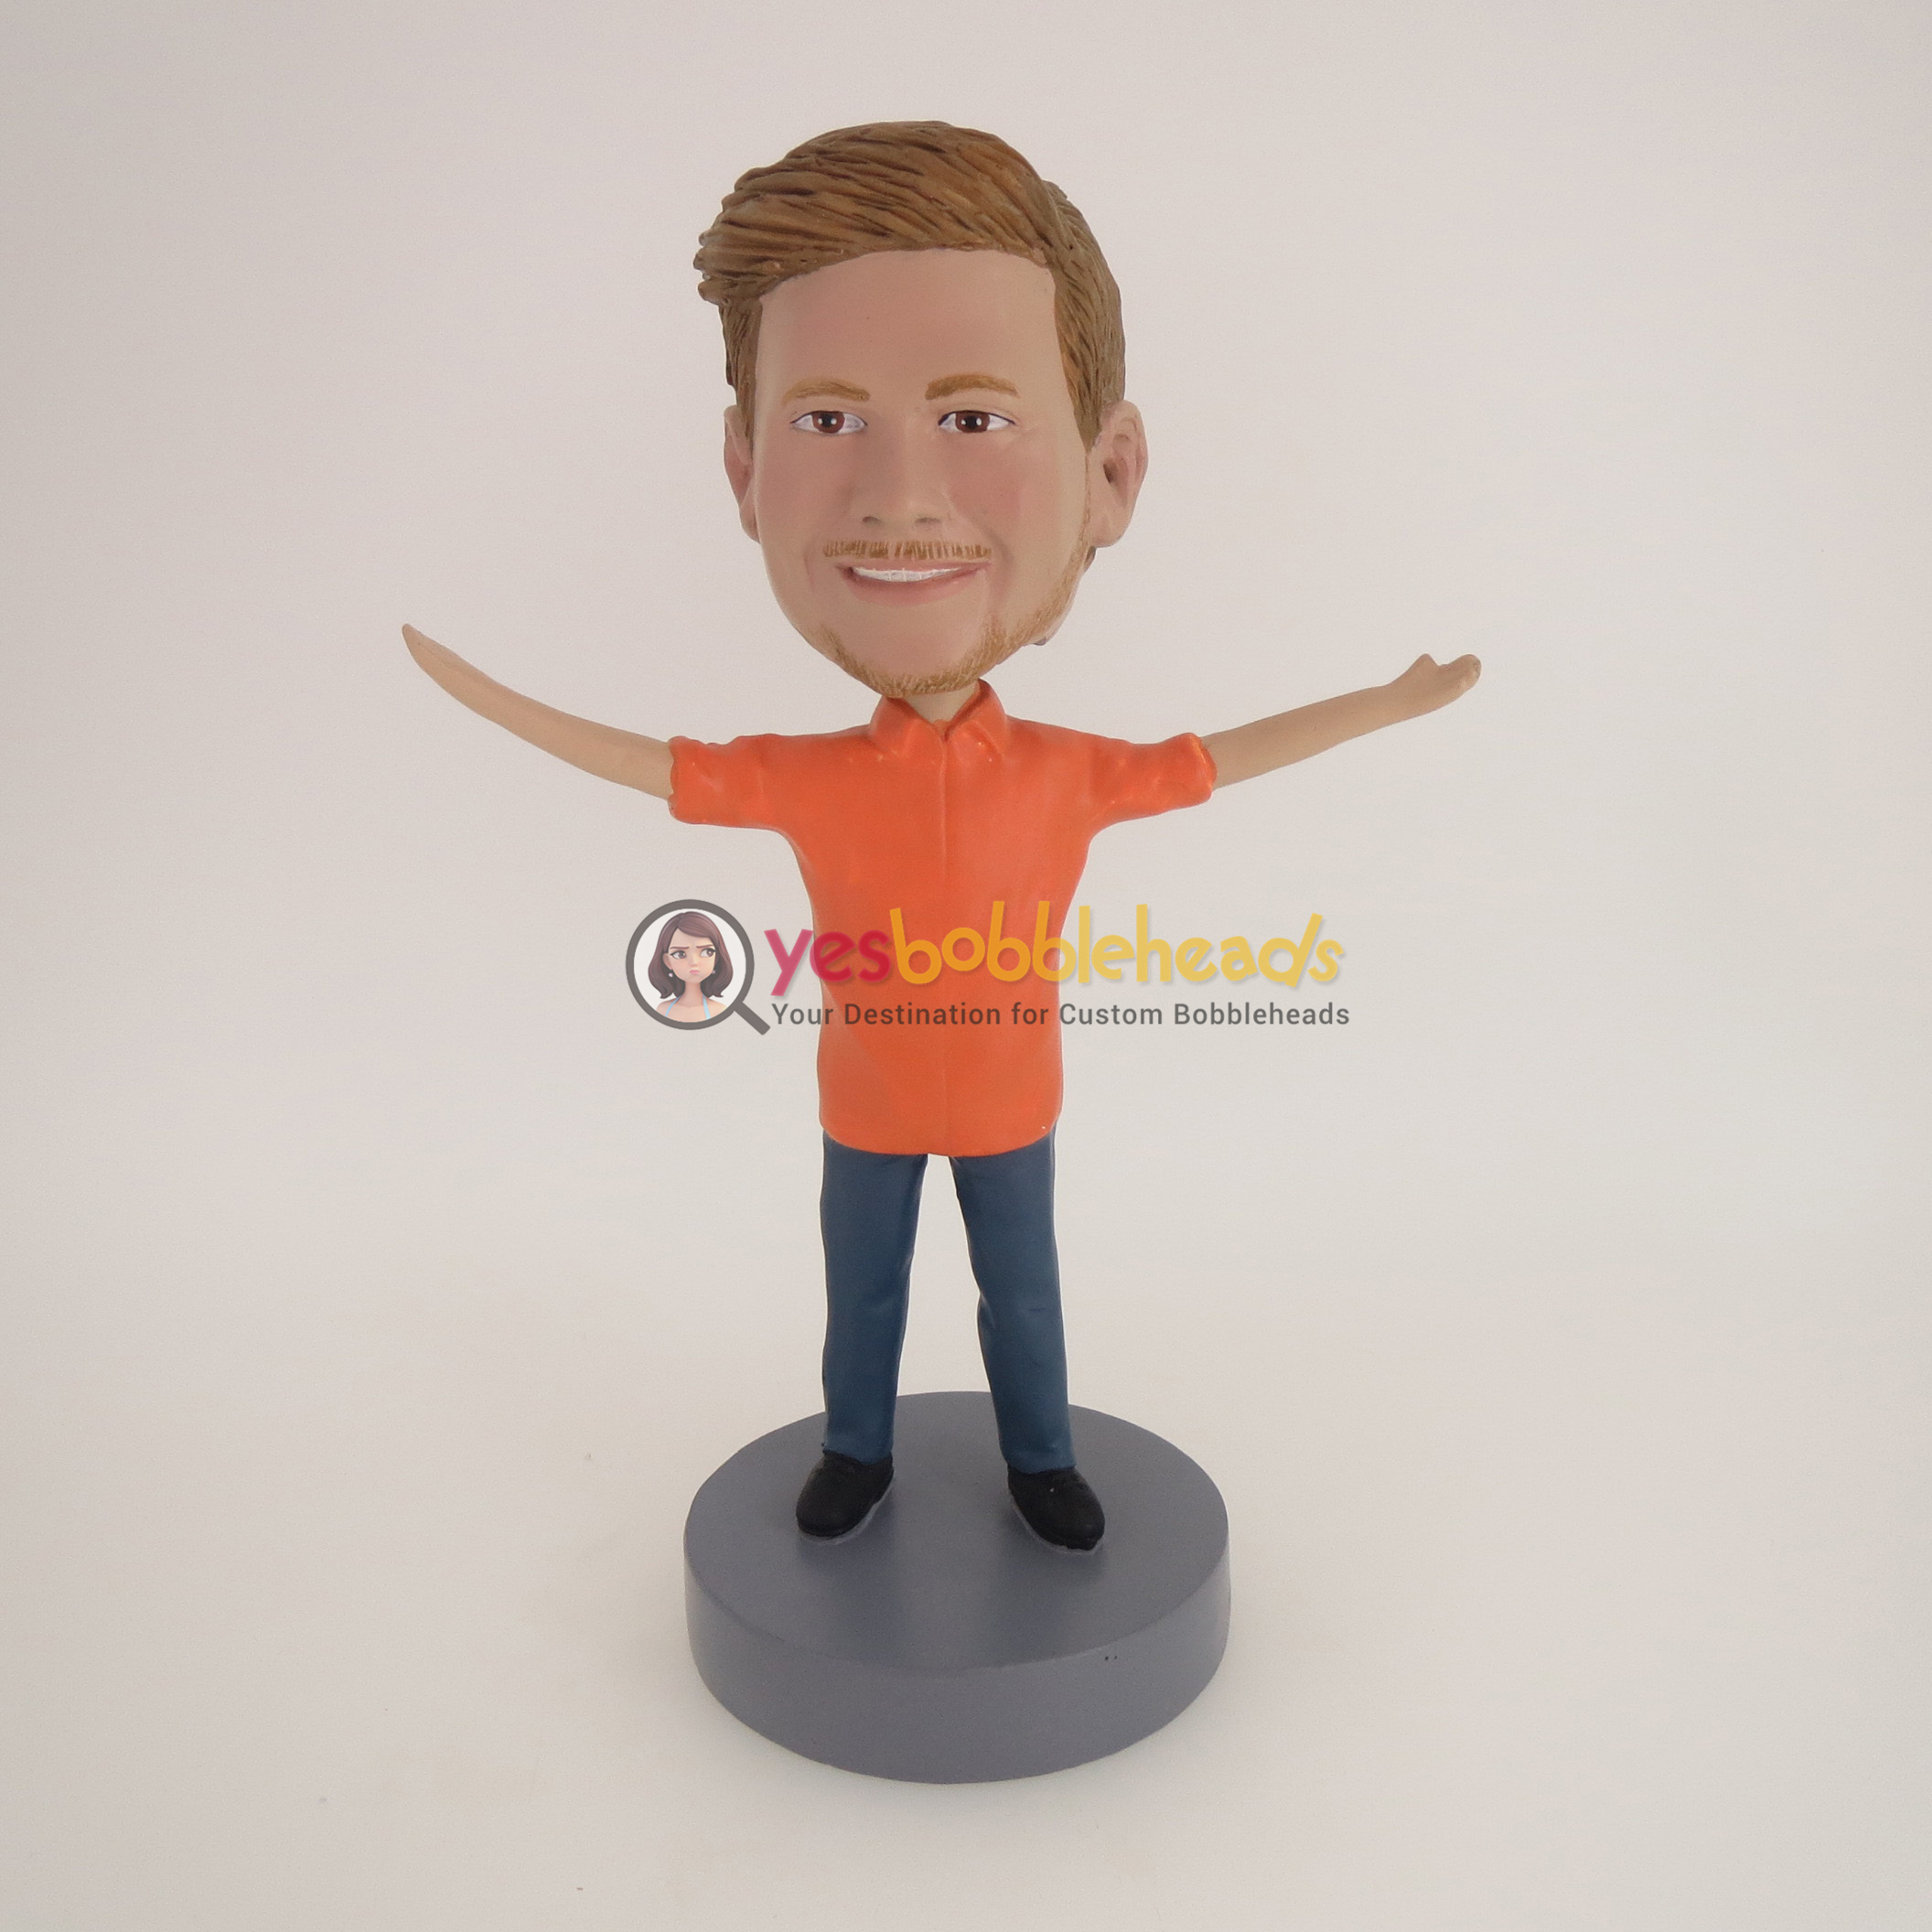 Picture of Custom Bobblehead Doll: Casual Man Welcoming